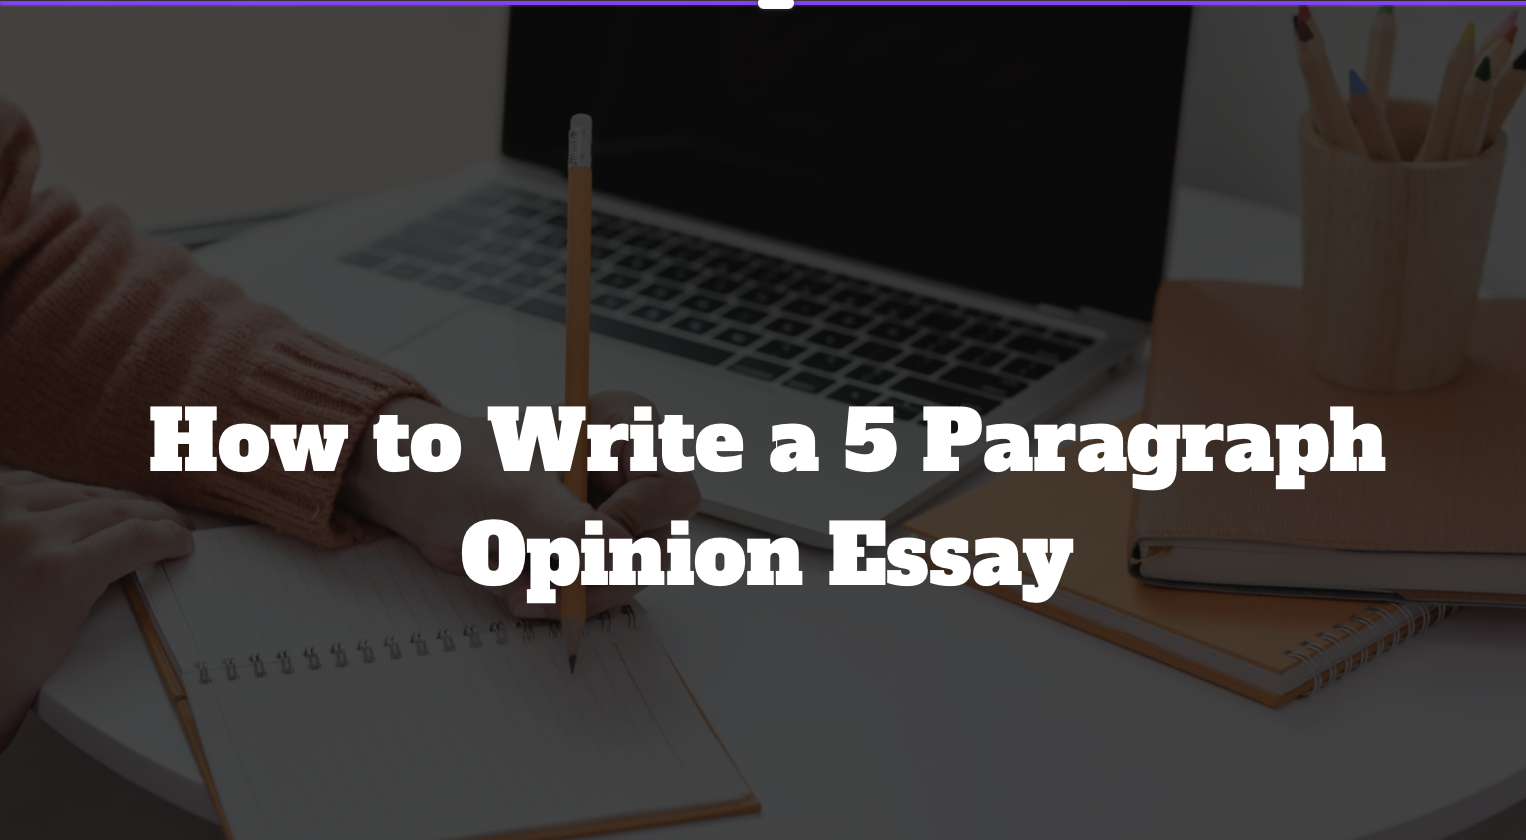 how to write a Write a 5 Paragraph Opinion Essay